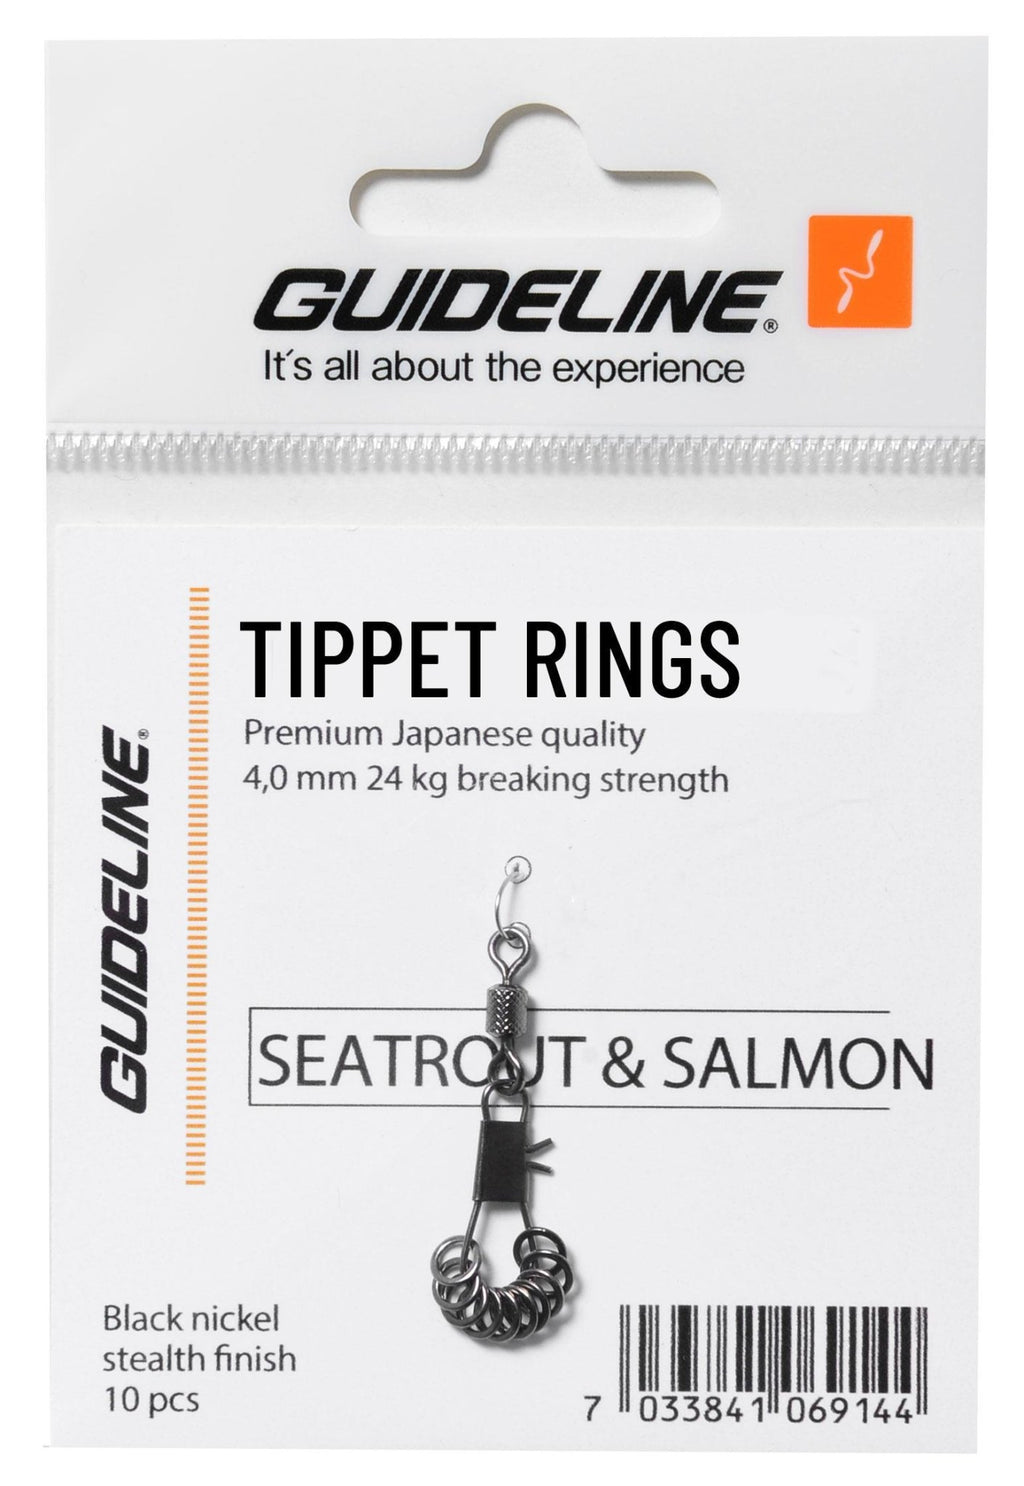 Guideline tippet Rings 4mm Salmon and Seatrout